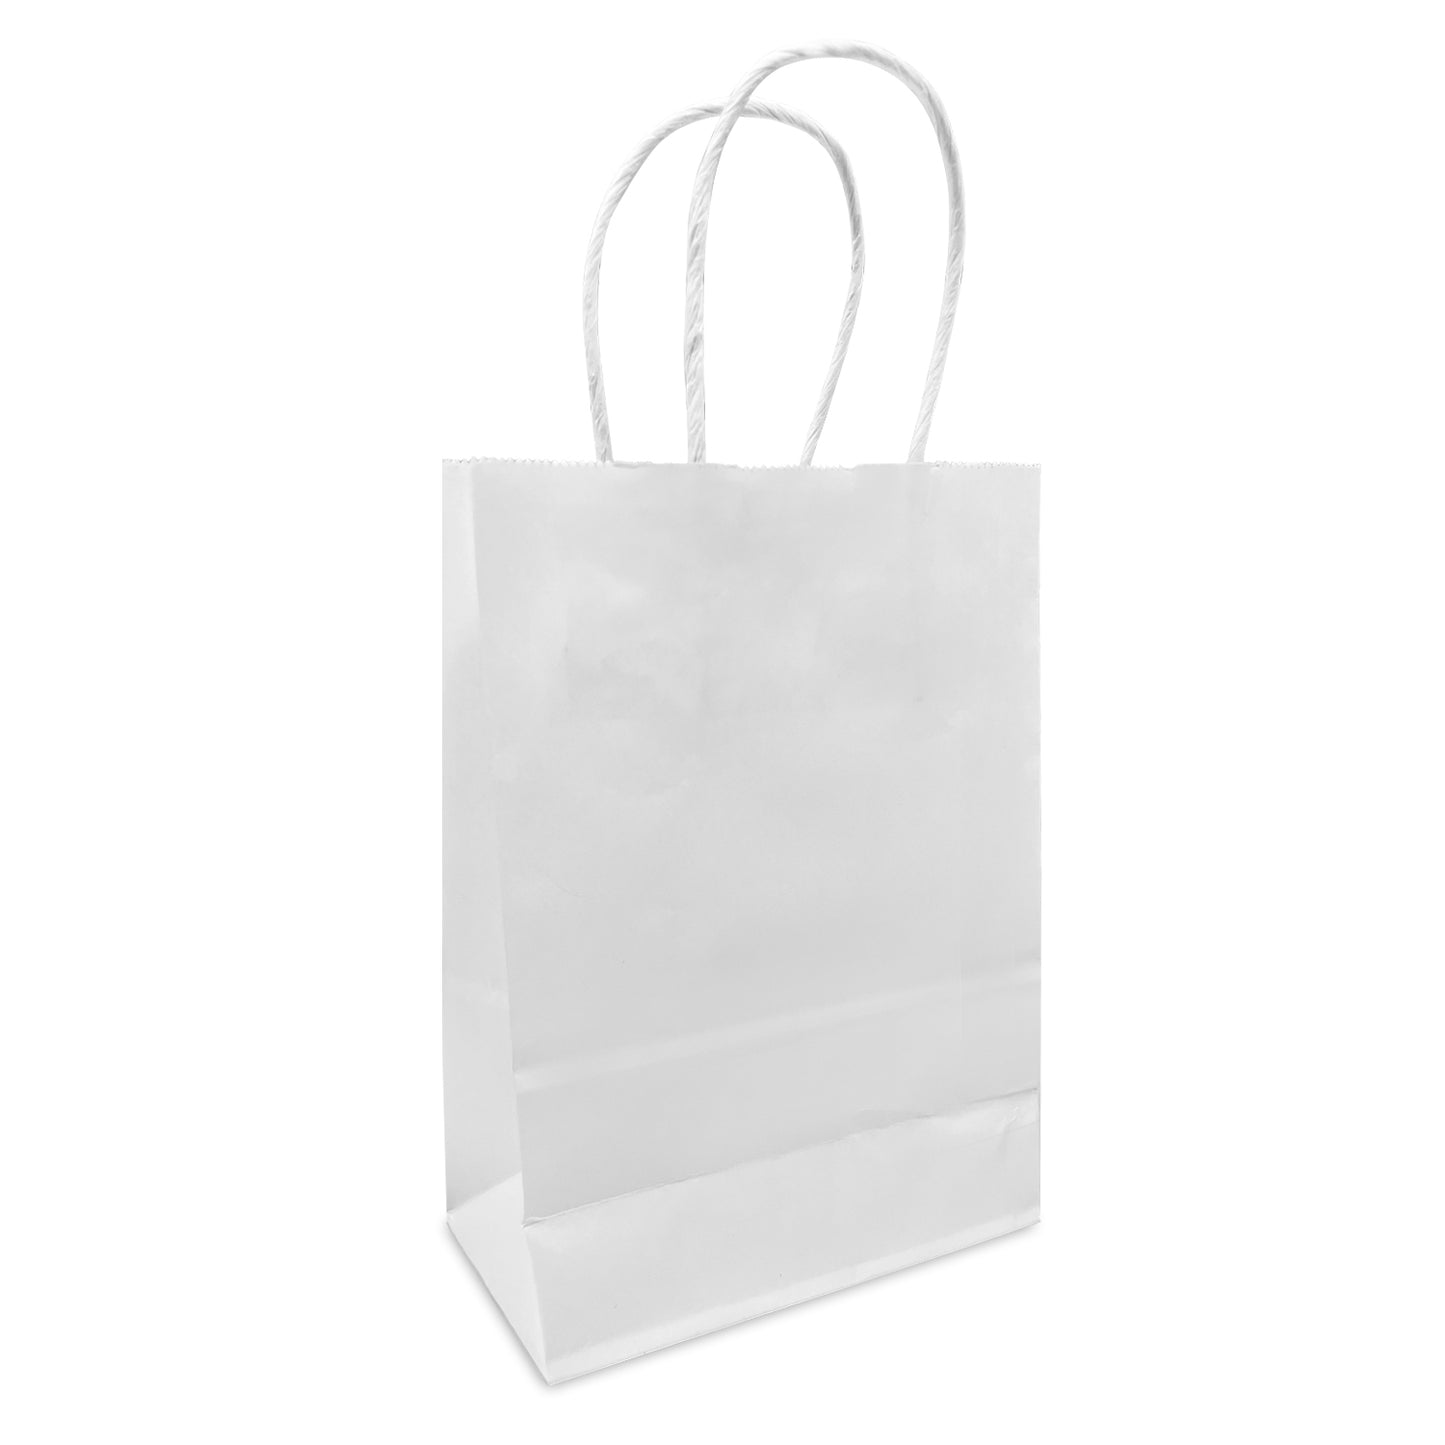 250 Pcs, Gem, 5.3x3.5x8.5 inches, White Kraft Paper Bags, with Twisted Handle